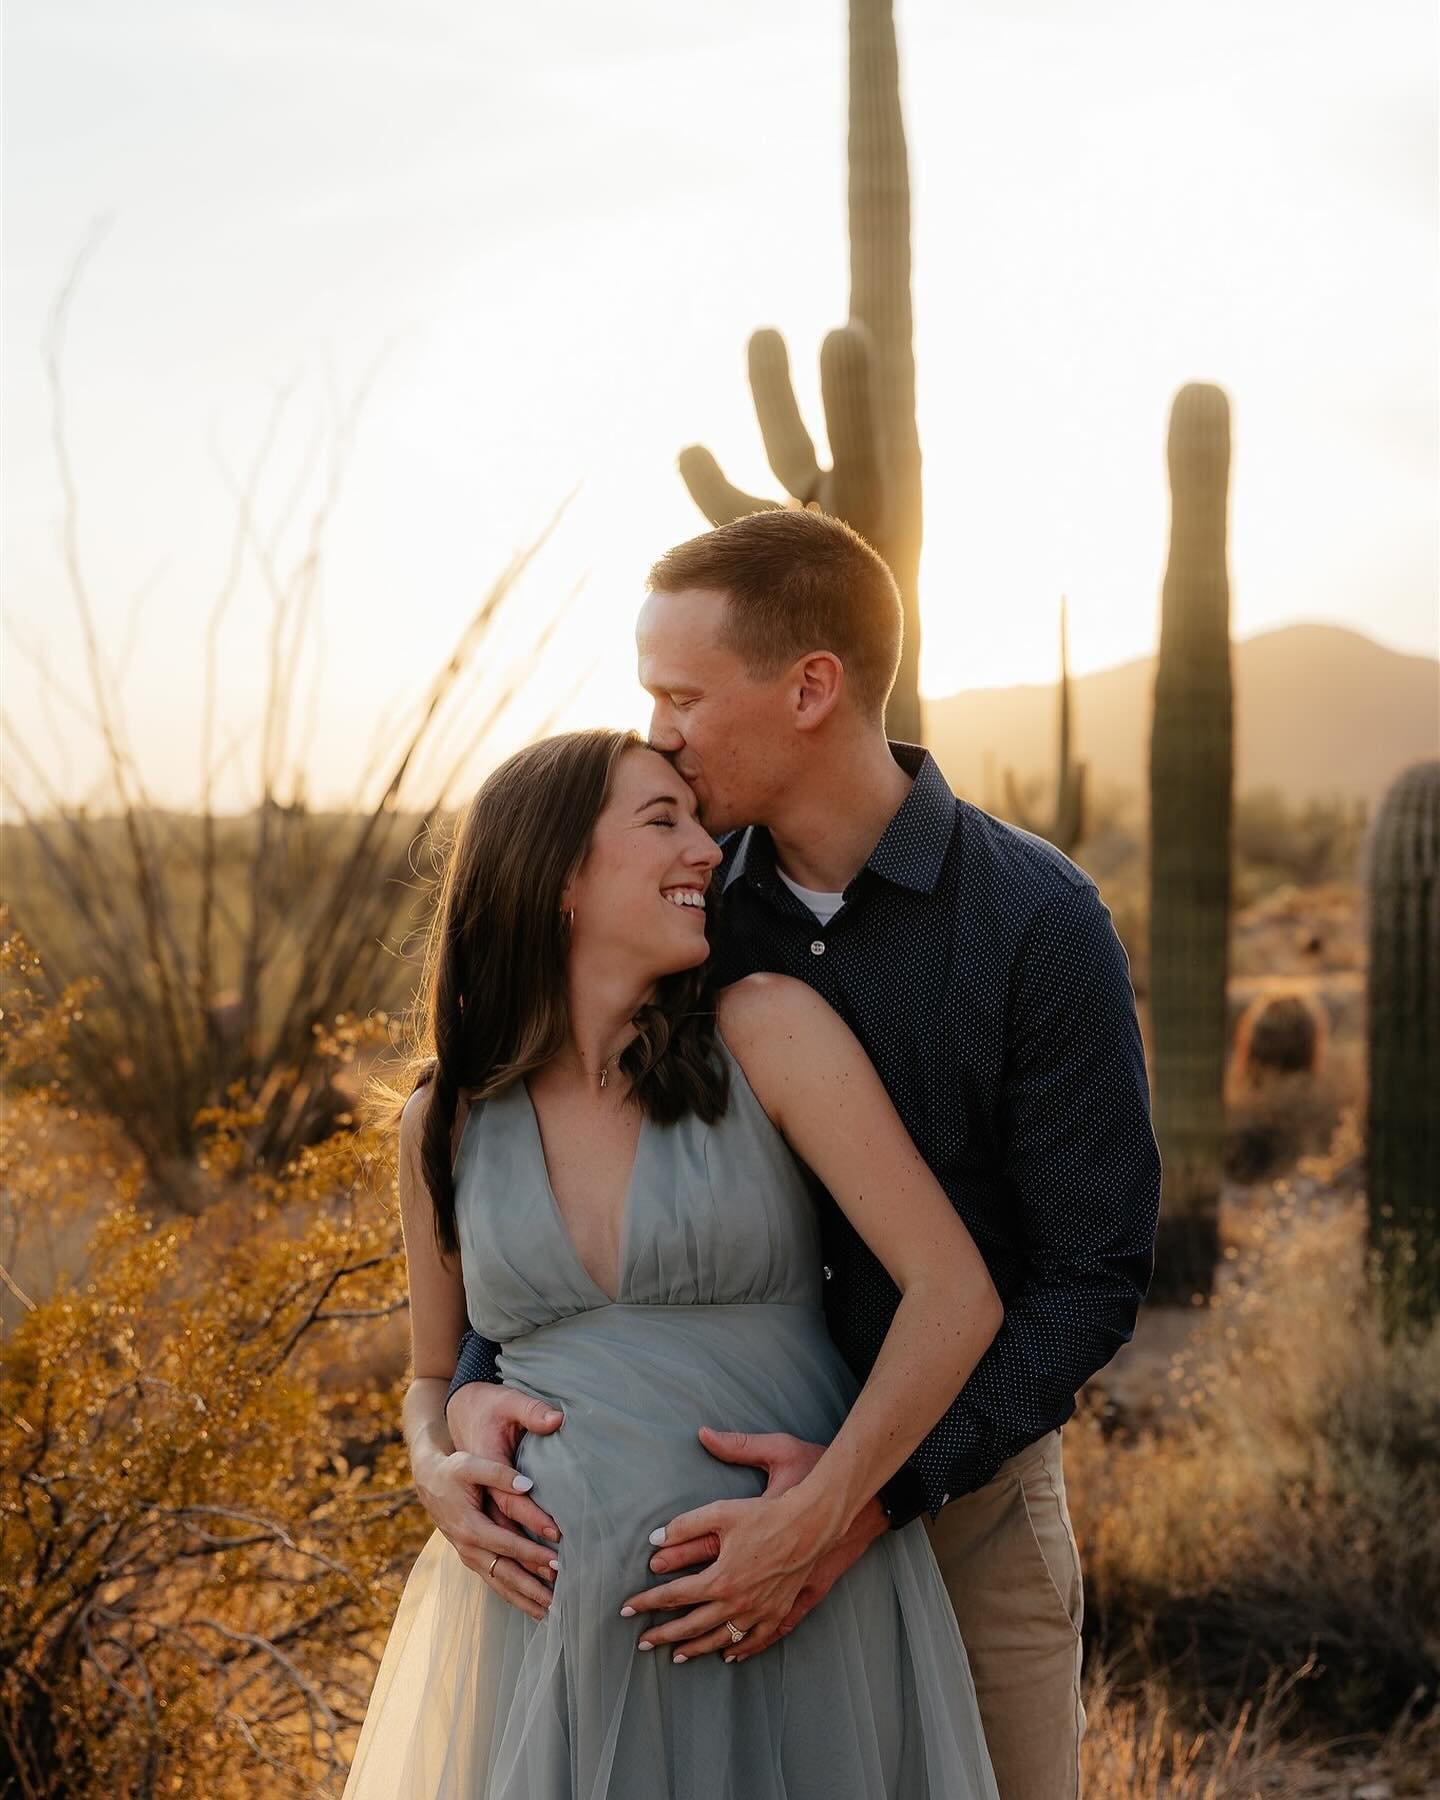 tender moments on this sweet maternity shoot ✨
&bull;
&bull;
&bull;
&bull;
&bull;
&bull;
&bull;
&bull;
#arizonaphotographer
#arizonaengagementphotographer 
#arizonacouplesphotographer
#arizonacouplephotographer
#arizonaweddingphotographer 
#arizonawe